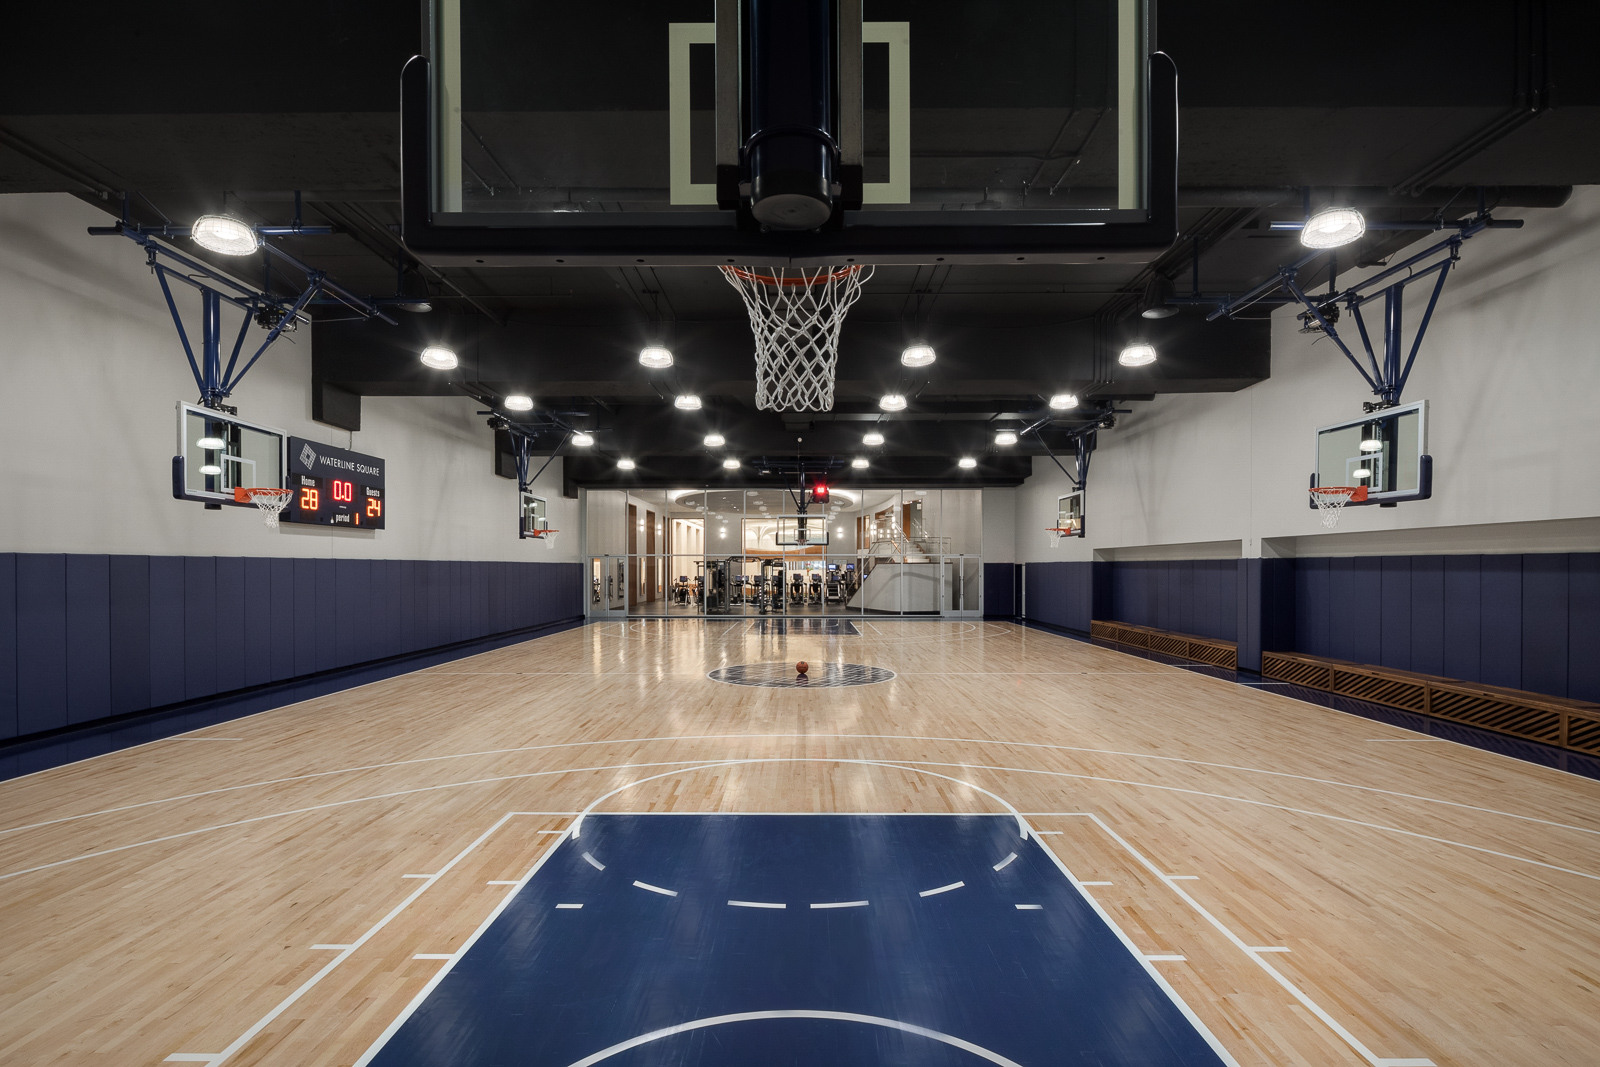 An indoor basketball court with a polished wooden floor and multiple hoops, featuring blue padded walls and benches along the sides, with a fitness area visible through the glass doors at the back.